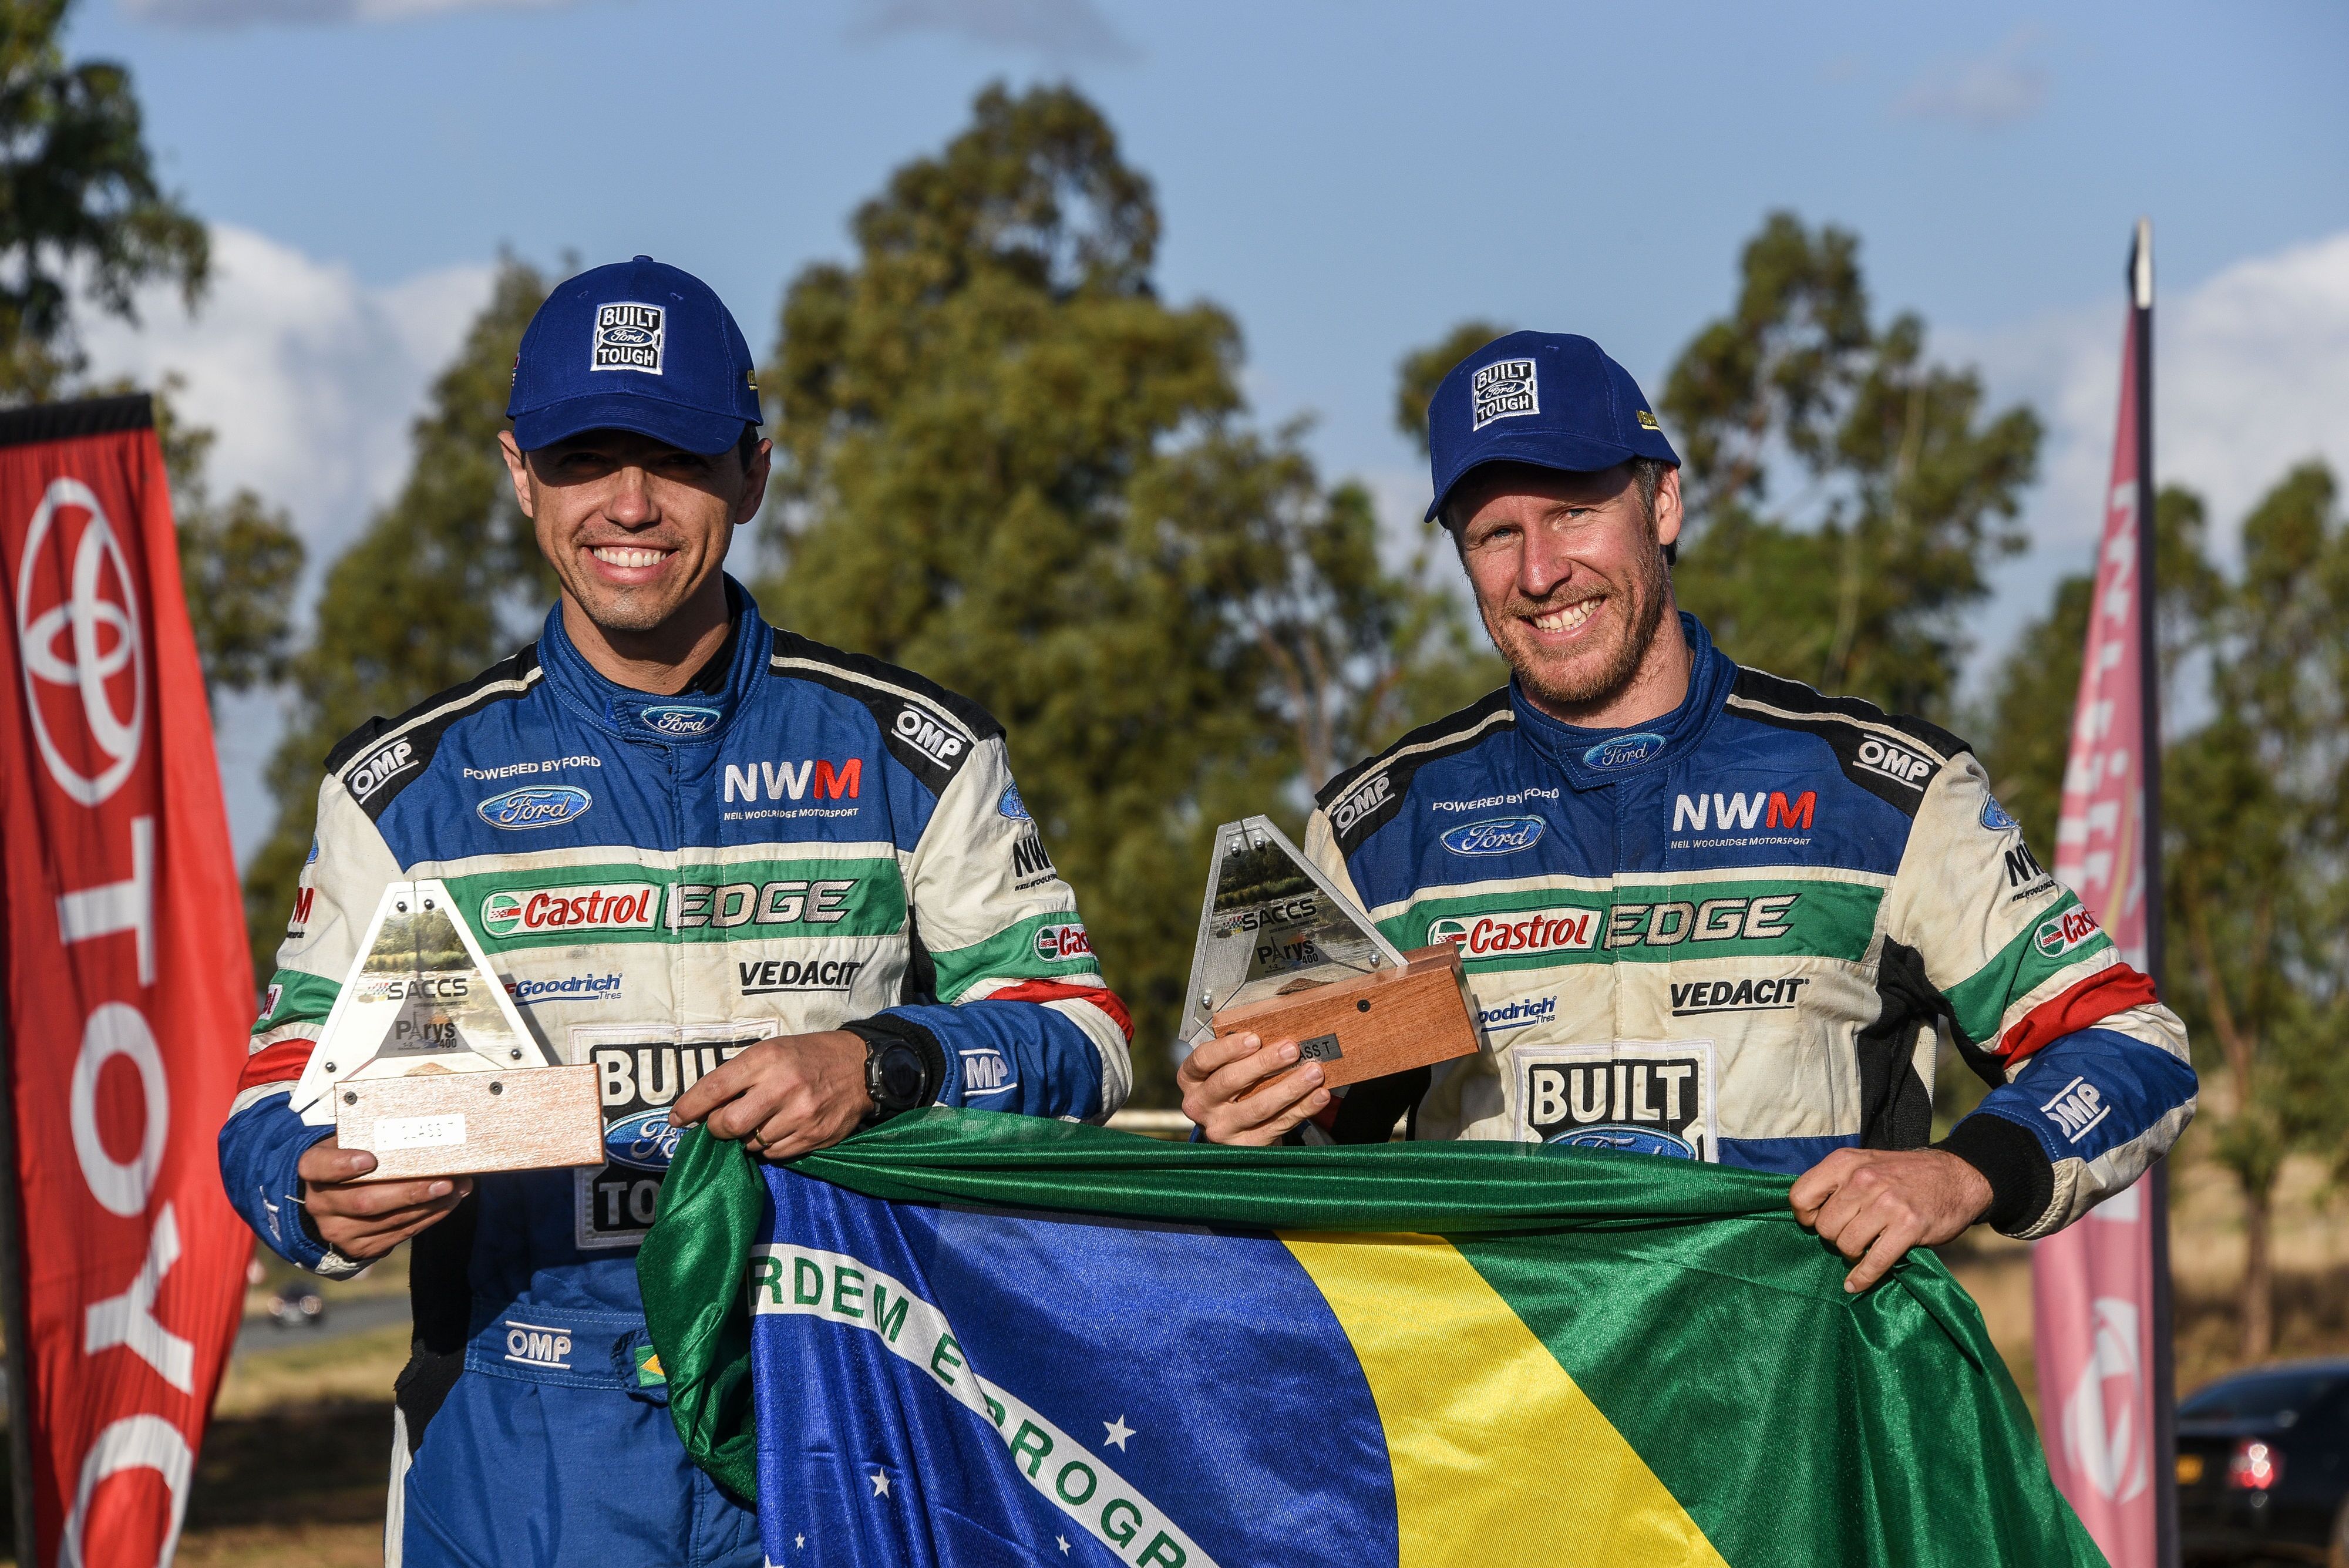 Baumgart and Cincea win in South Africa